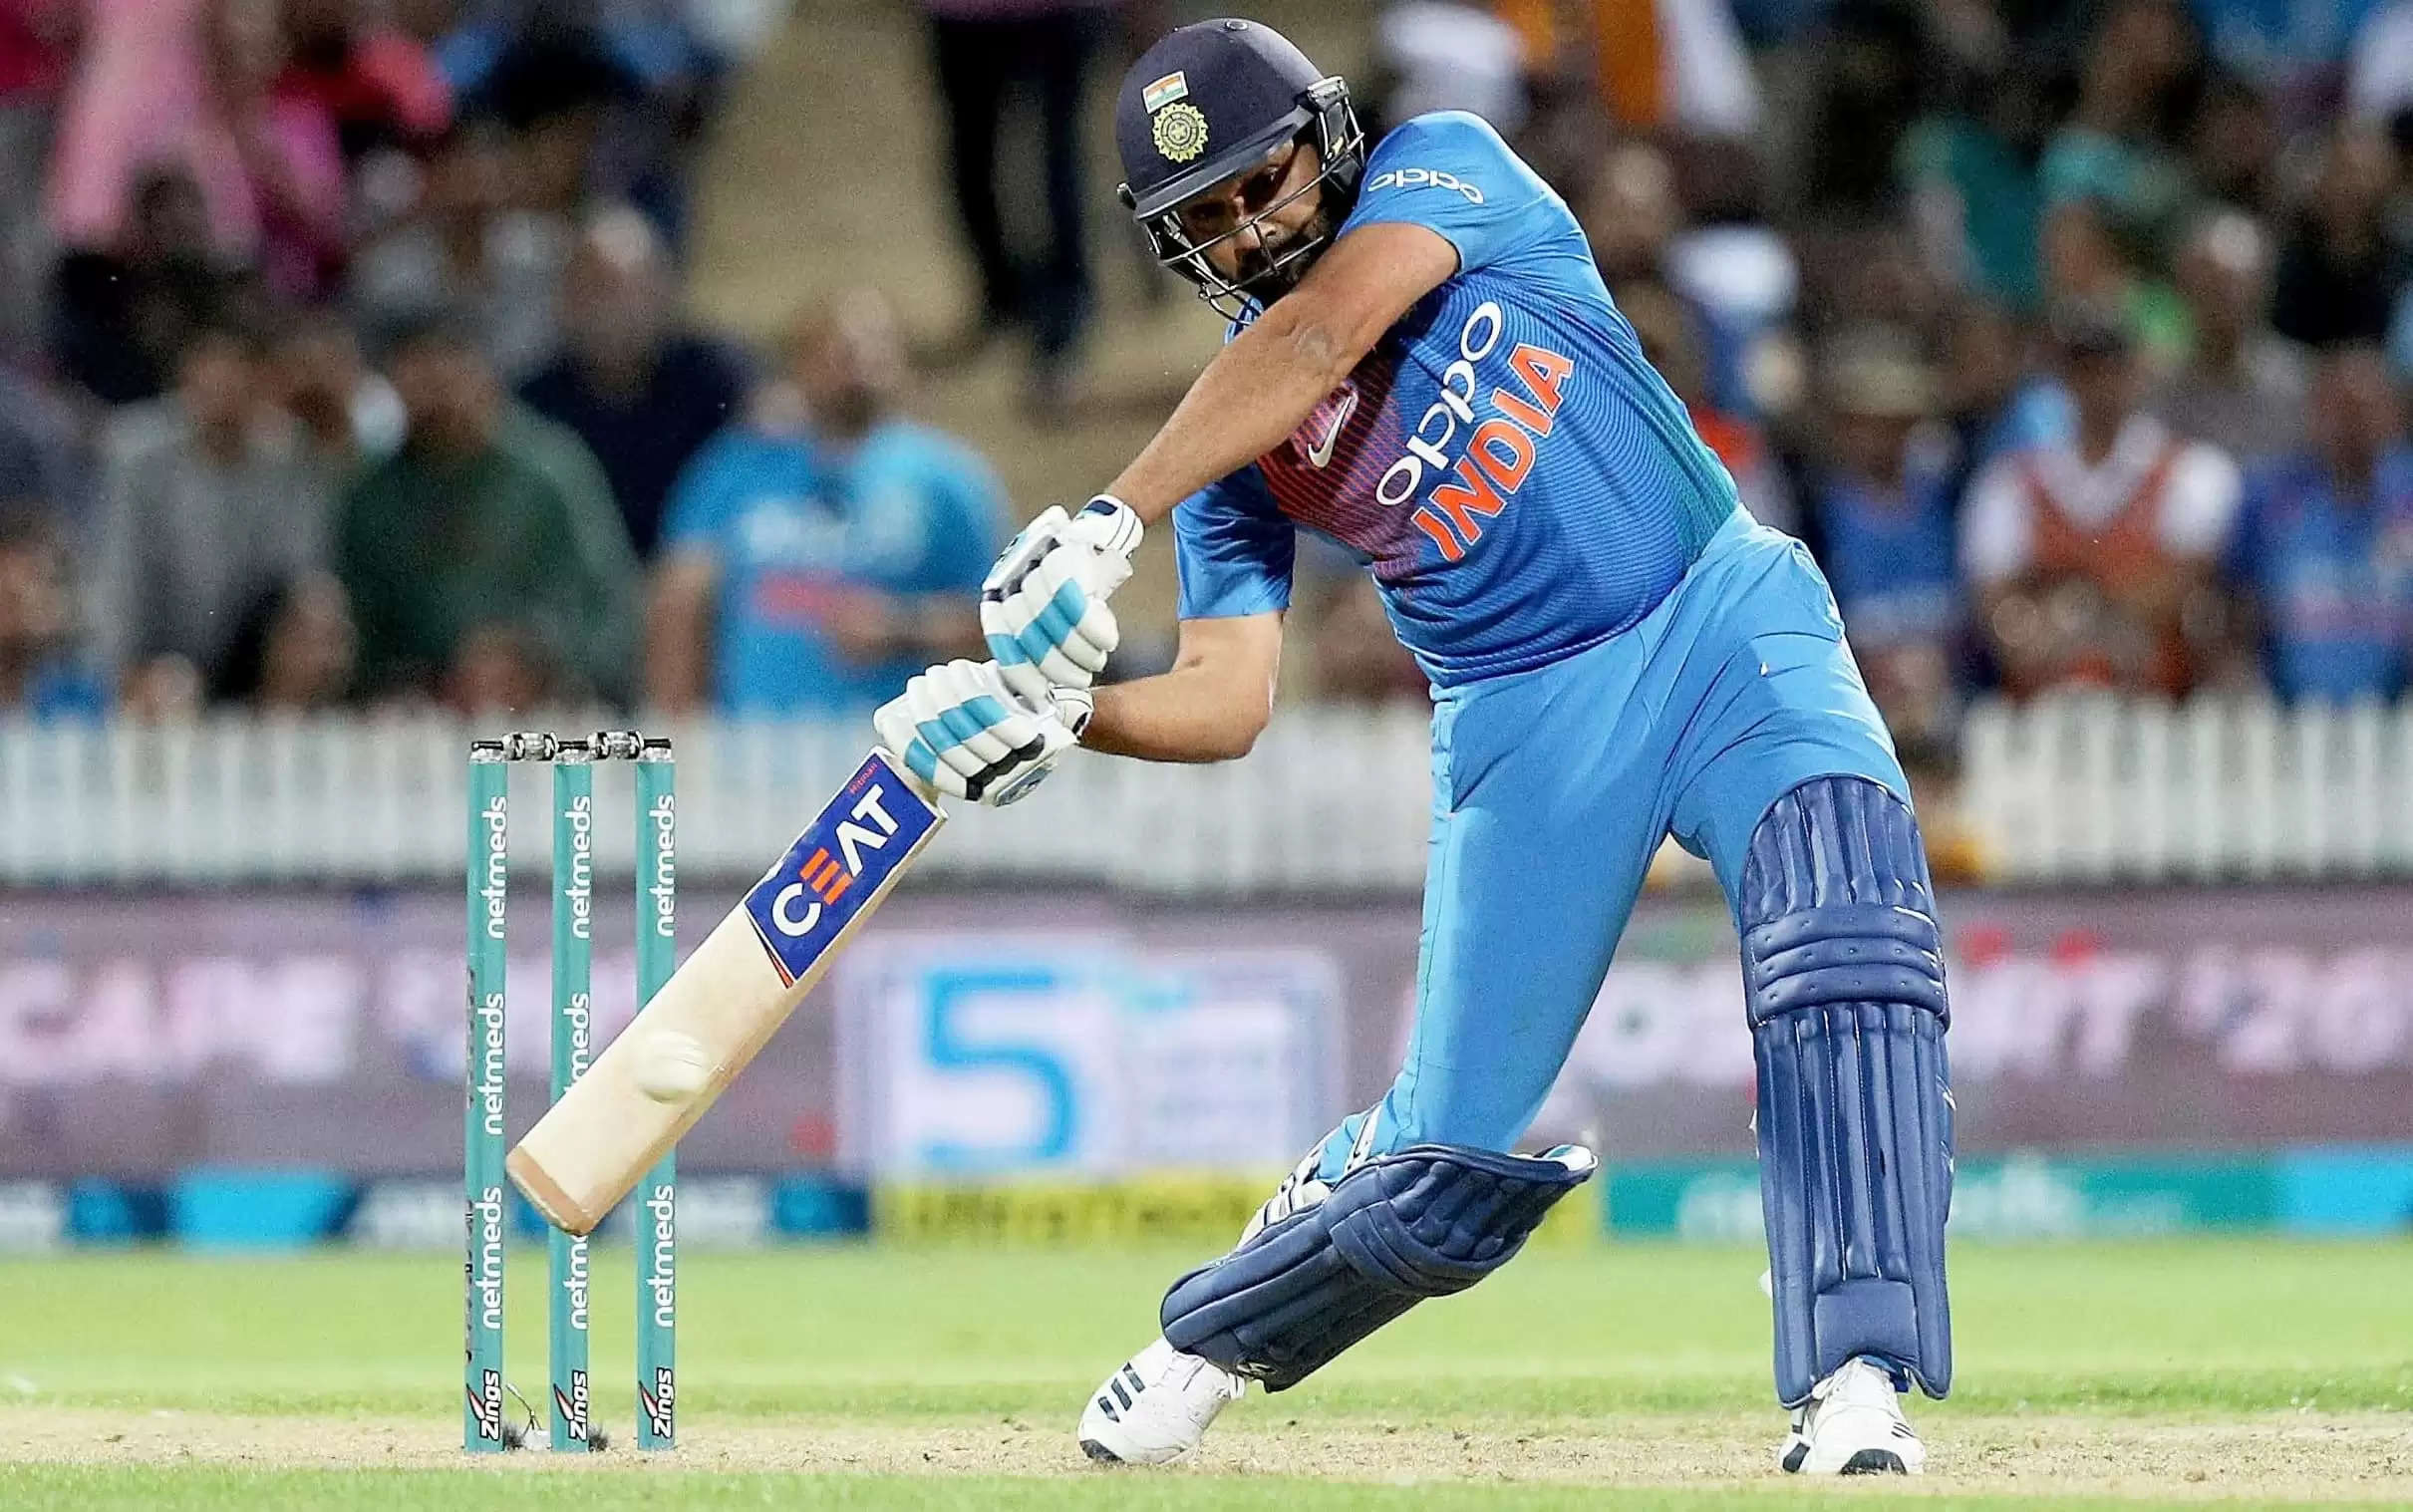 “You want me and Shikhar Dhawan out of the side?” – Rohit Sharma’s hilarious response to Journo’s question about younsgters’ chances